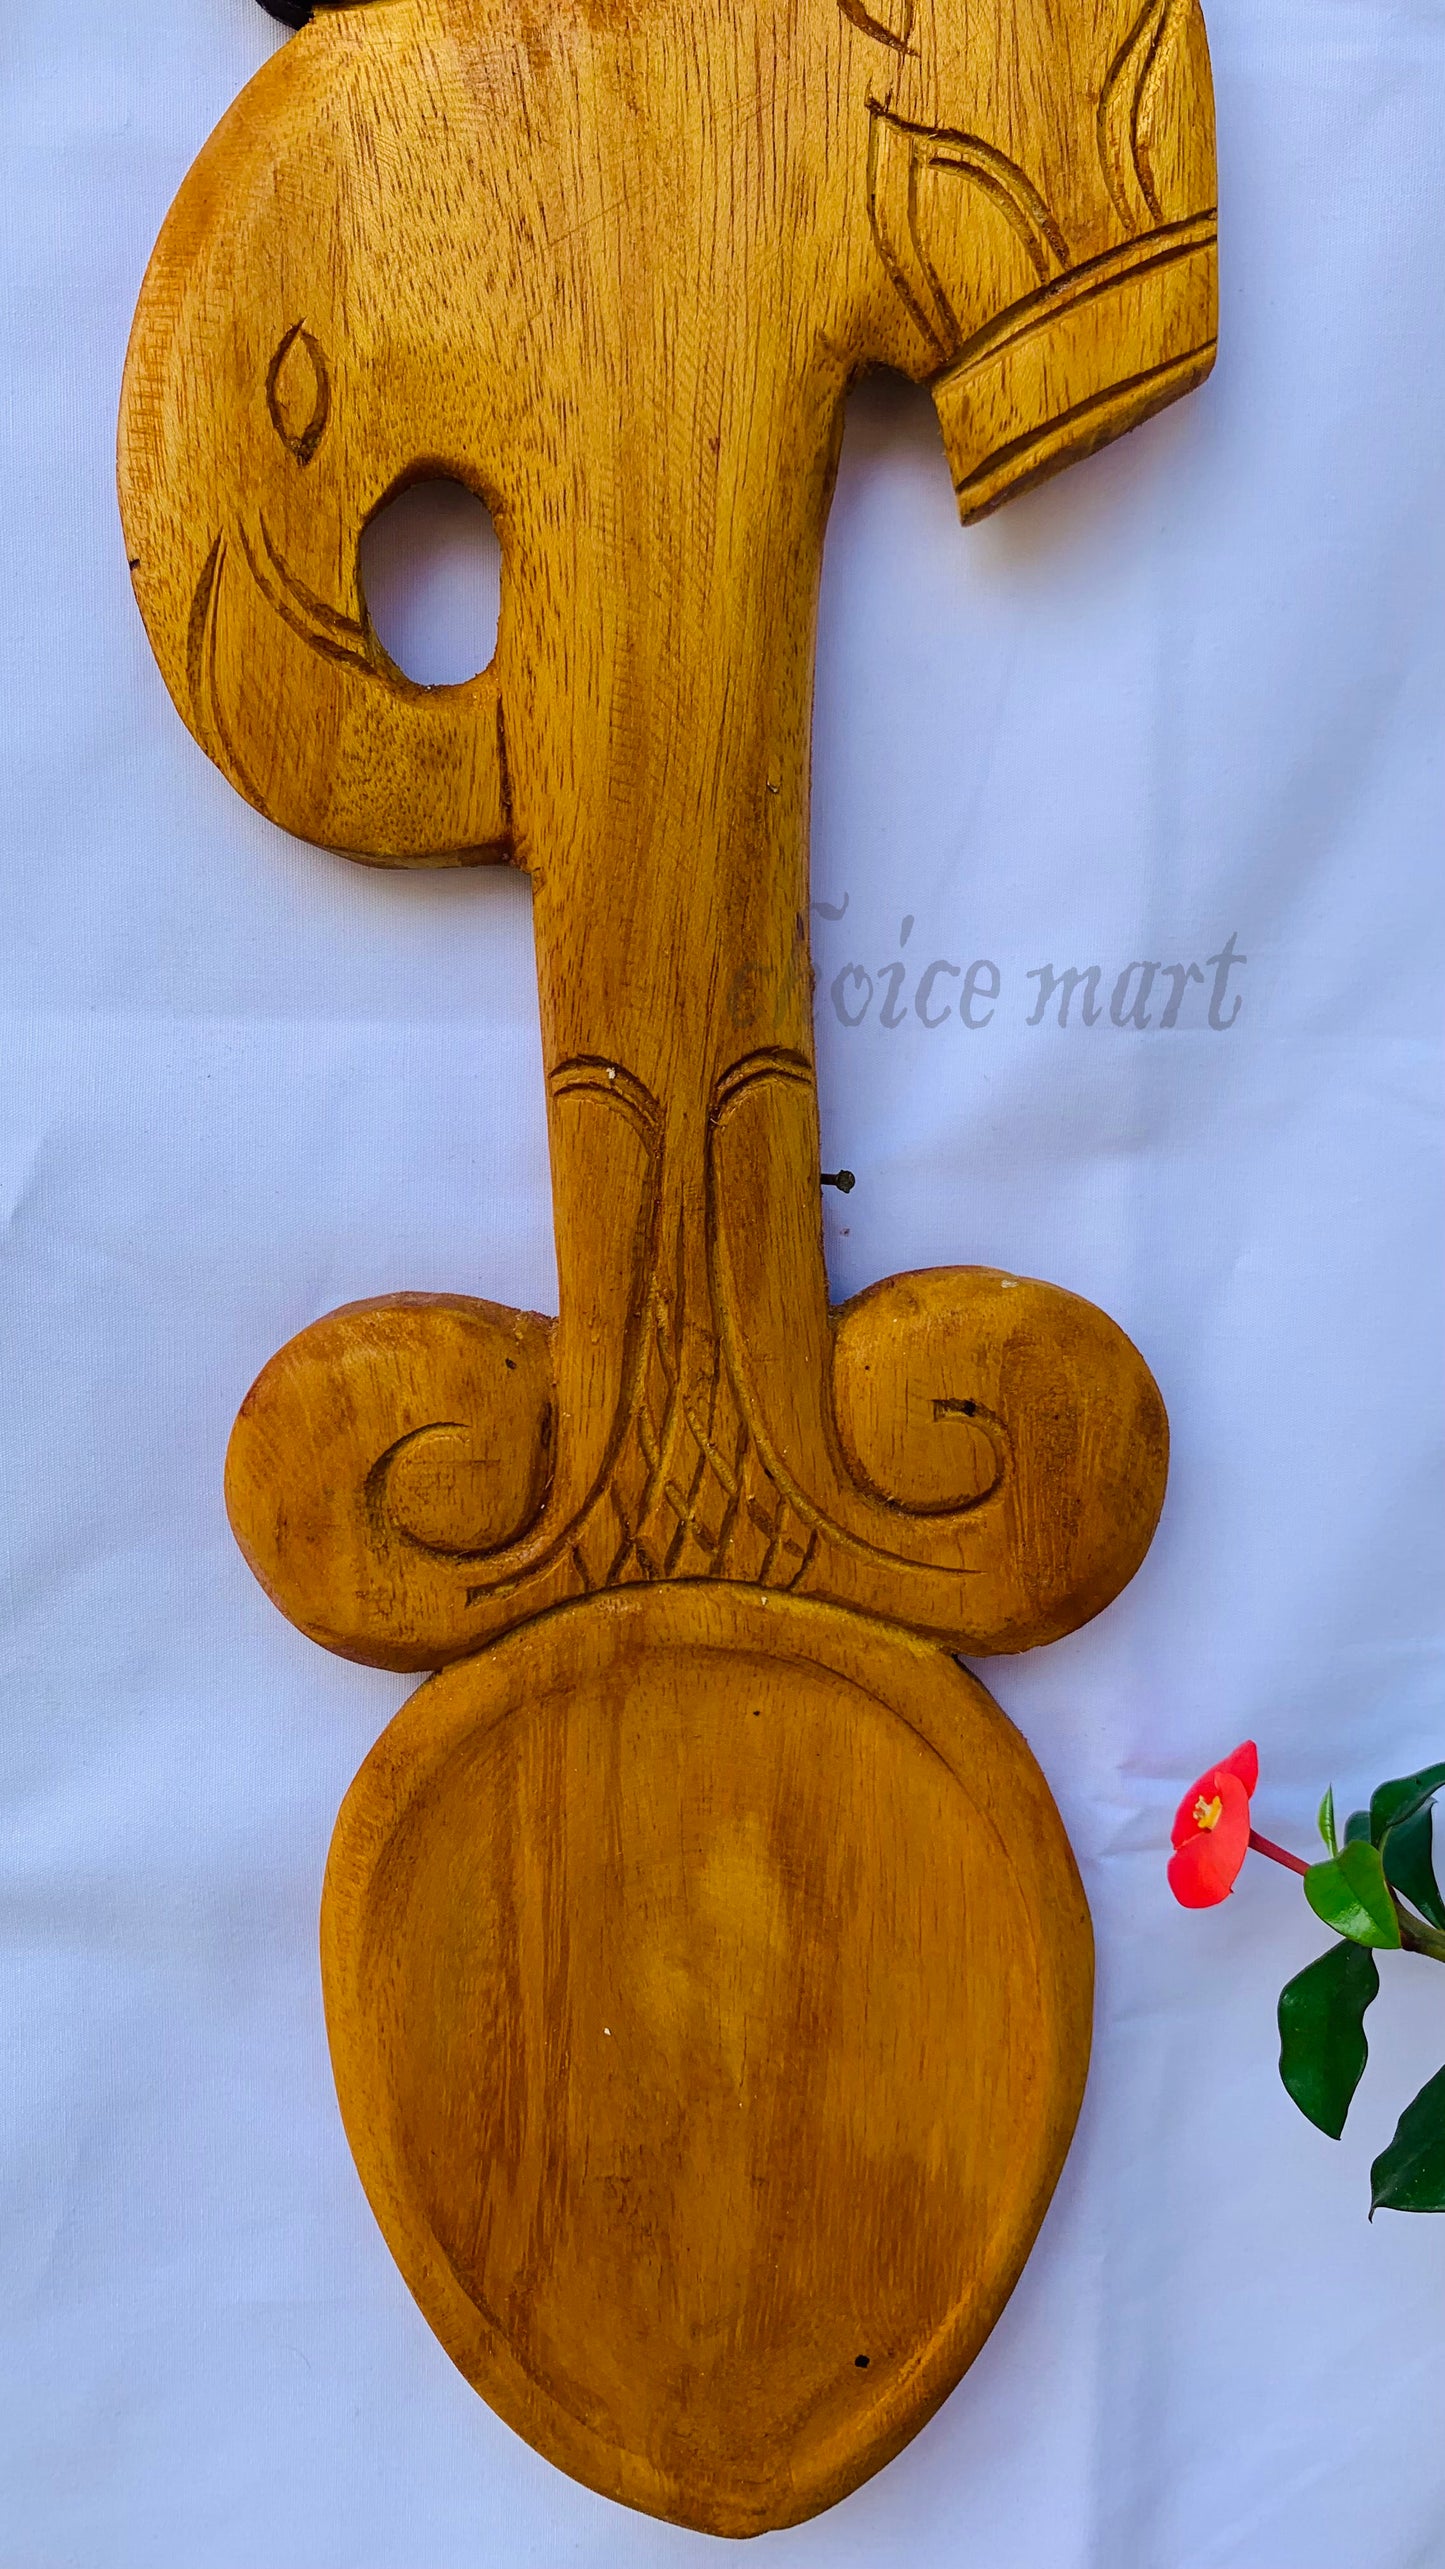 Wooden Fork & Spoon Decorative Kitchen Wall Art Wood Carving